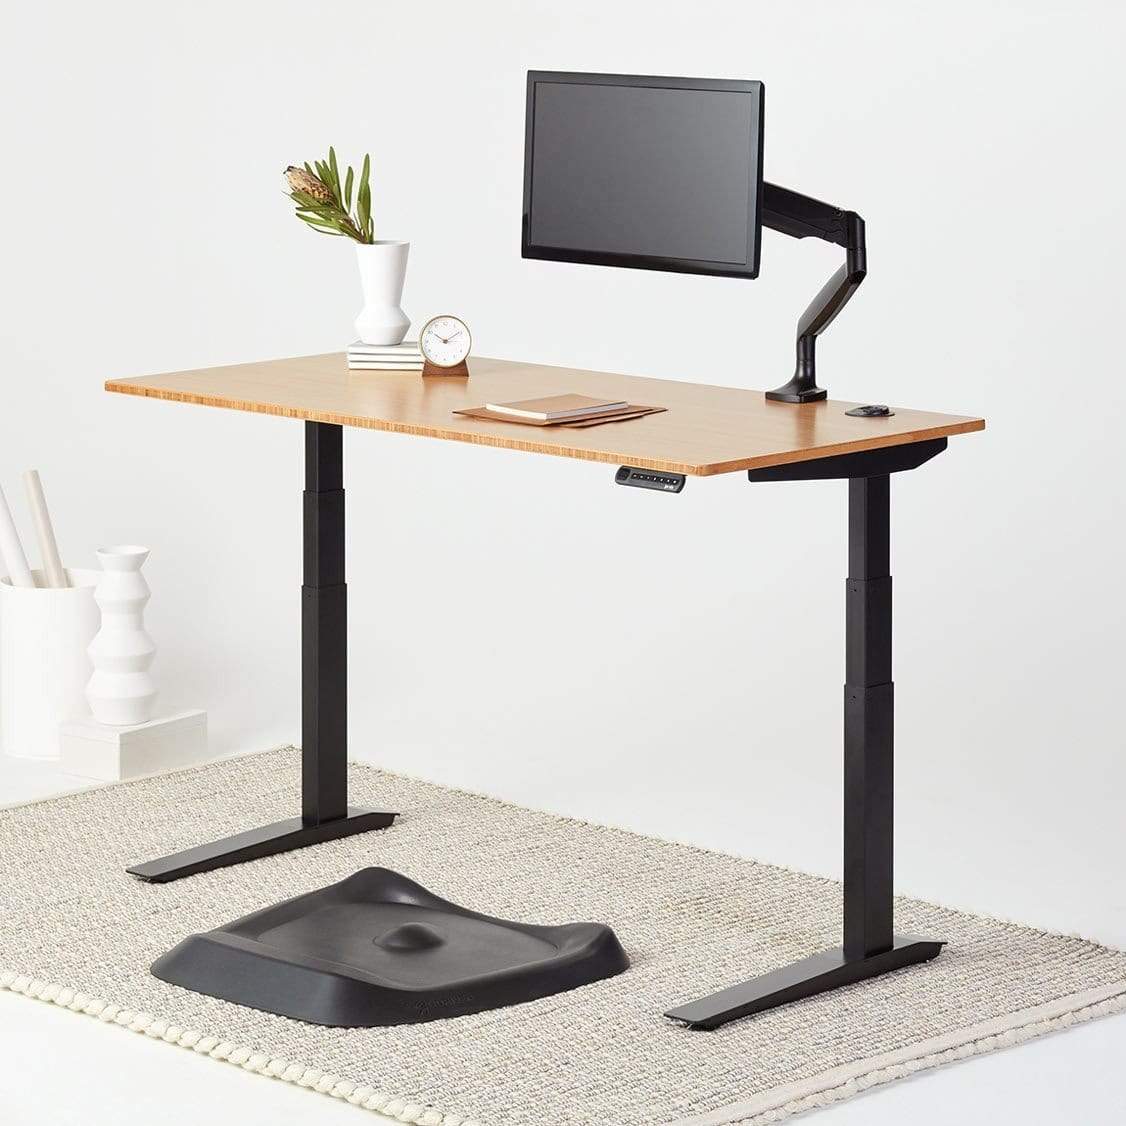 Looking for the Perfect Standing Desk? Here’s Why a Post &amp; Base Sit- Stand Desk Converter Should Be Your Option